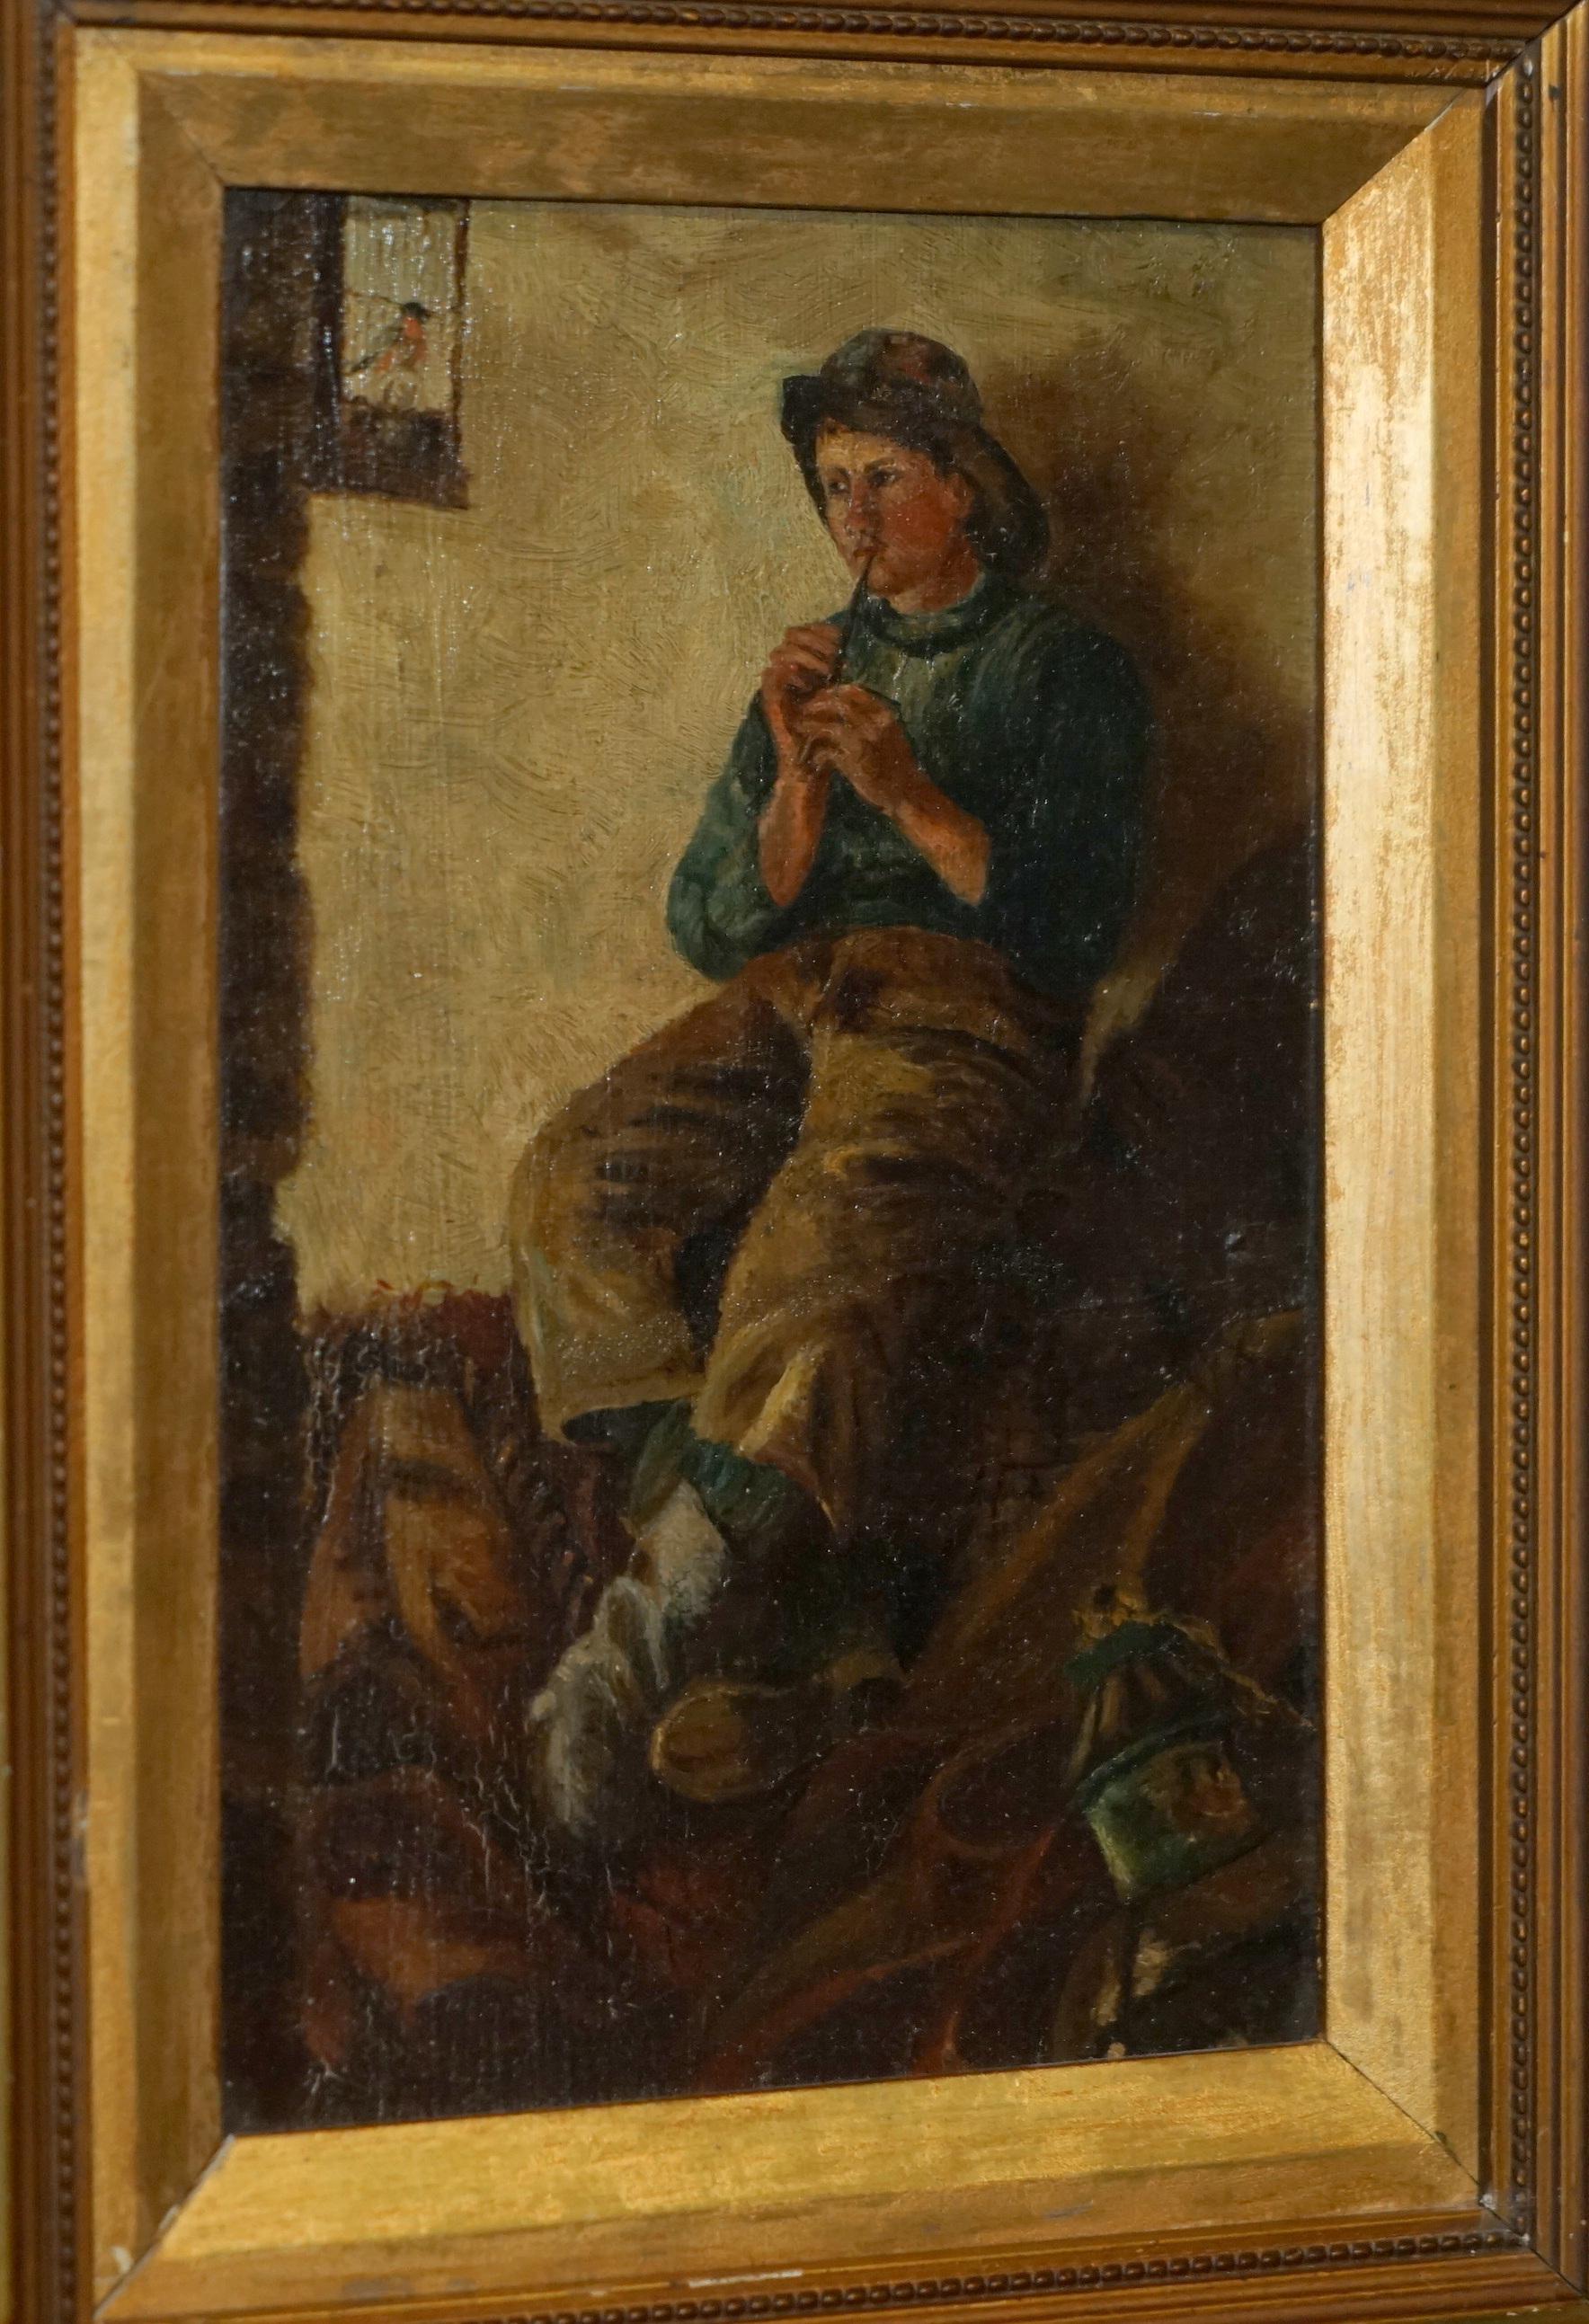 High Victorian SUBLIME ANTIQUE ViCTORIAN OIL PAINTING OF A YOUNG BOY (FISHERMAN) PLAYING A PIPE For Sale